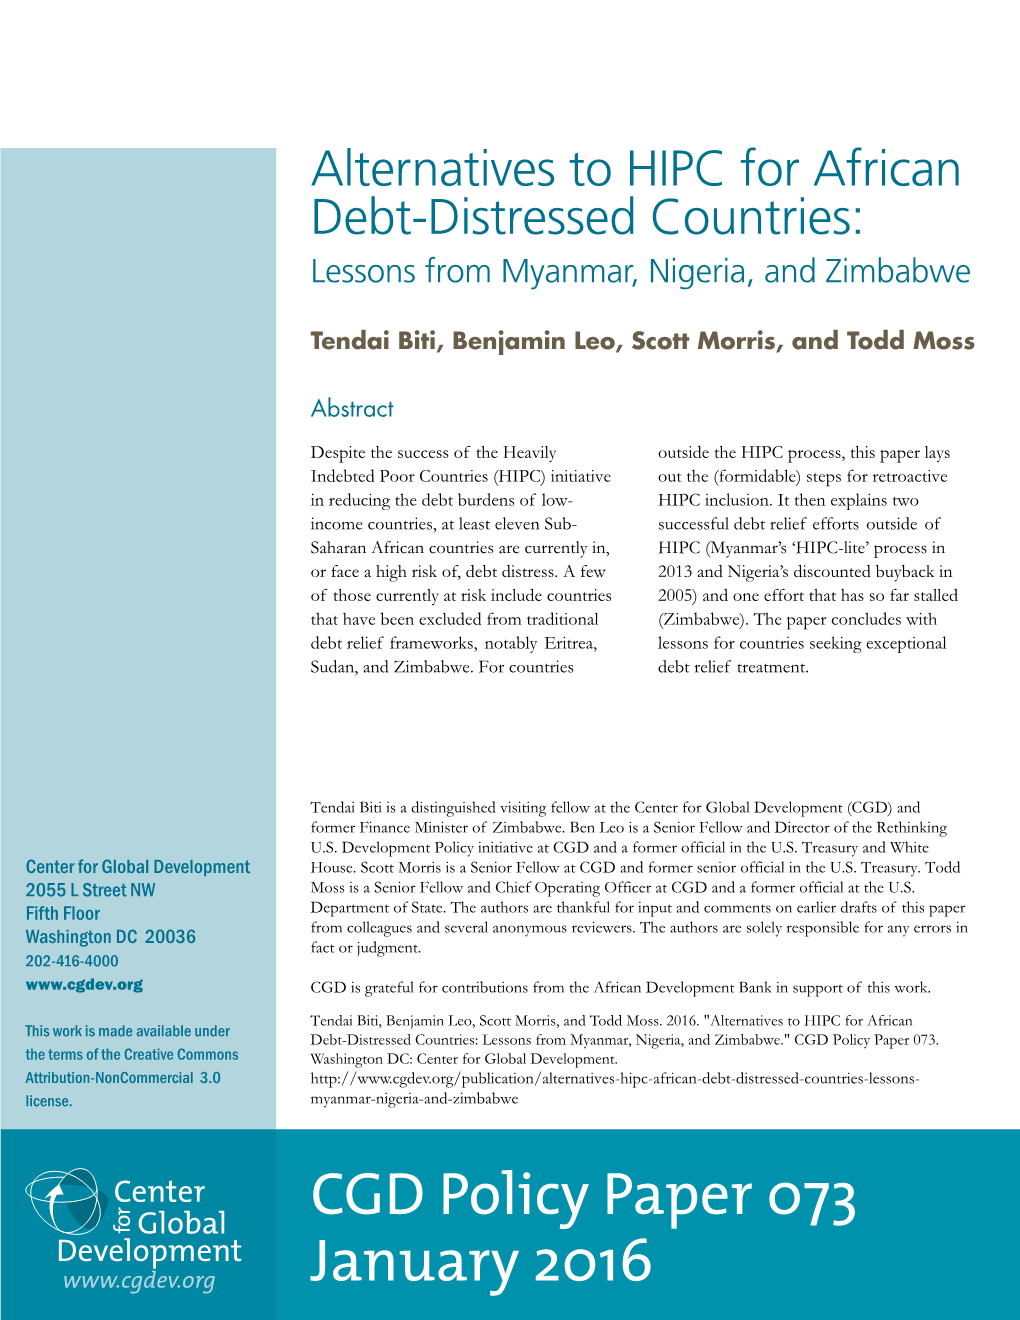 Alternatives to HIPC for African Debt-Distressed Countries: Lessons from Myanmar, Nigeria, and Zimbabwe